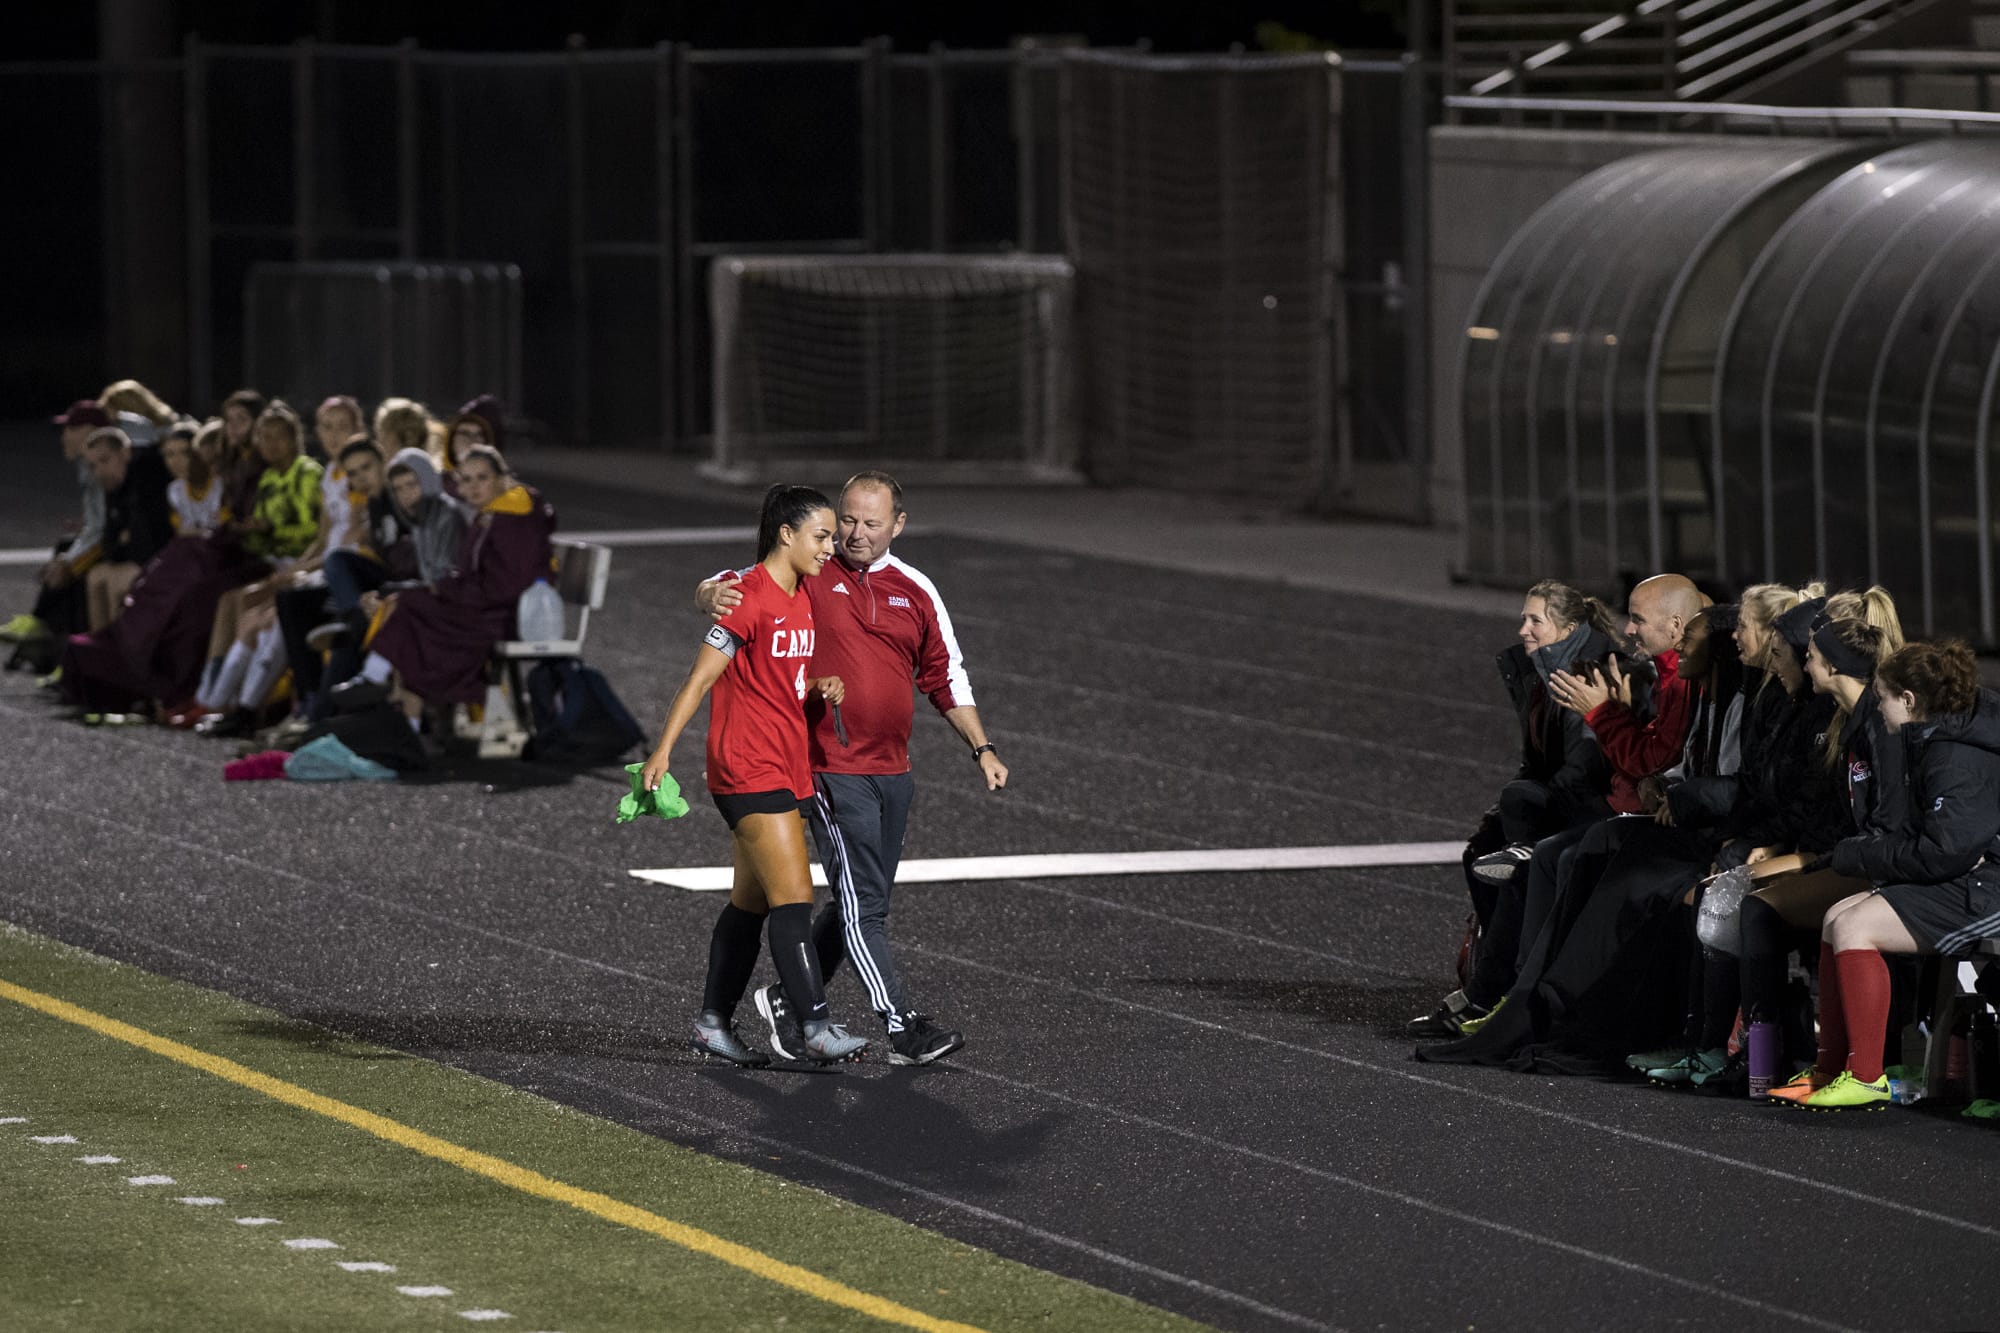 Camas' Maddie Kemp (4) is congratulated by coach Roland Minder after surpassing her 100th career goal mark during Tuesday night's game against Prairie High School at Doc Harris Stadium in Camas on Sept. 18, 2018. Camas won 10-3.